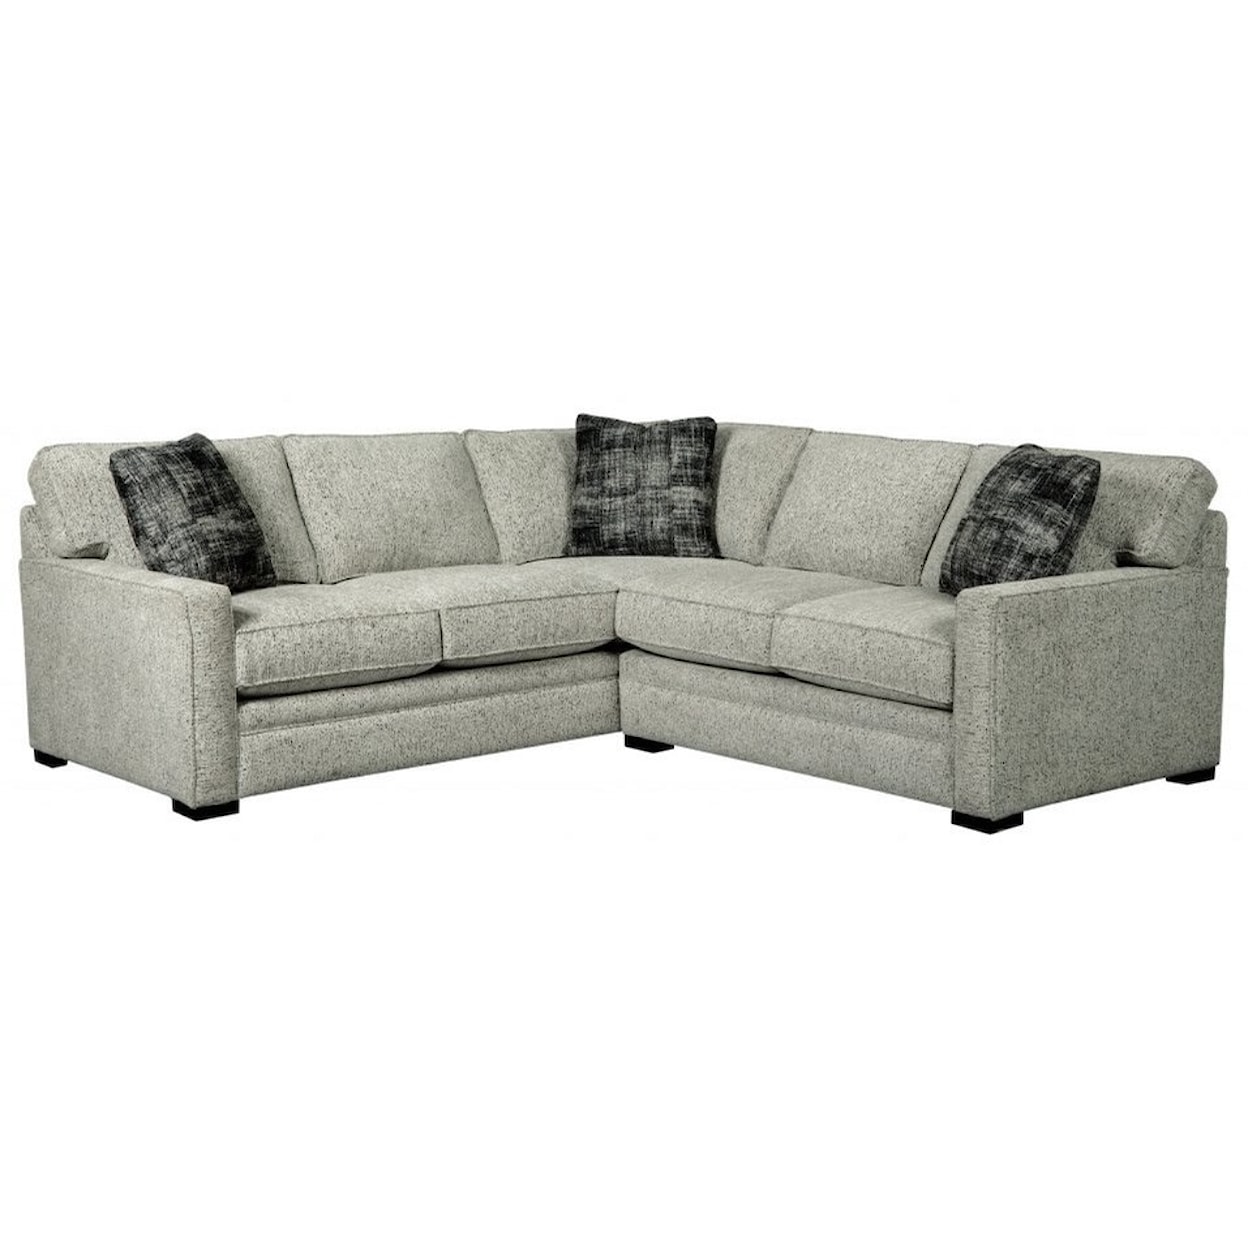 Jonathan Louis Choices - Juno 2-Piece Sectional